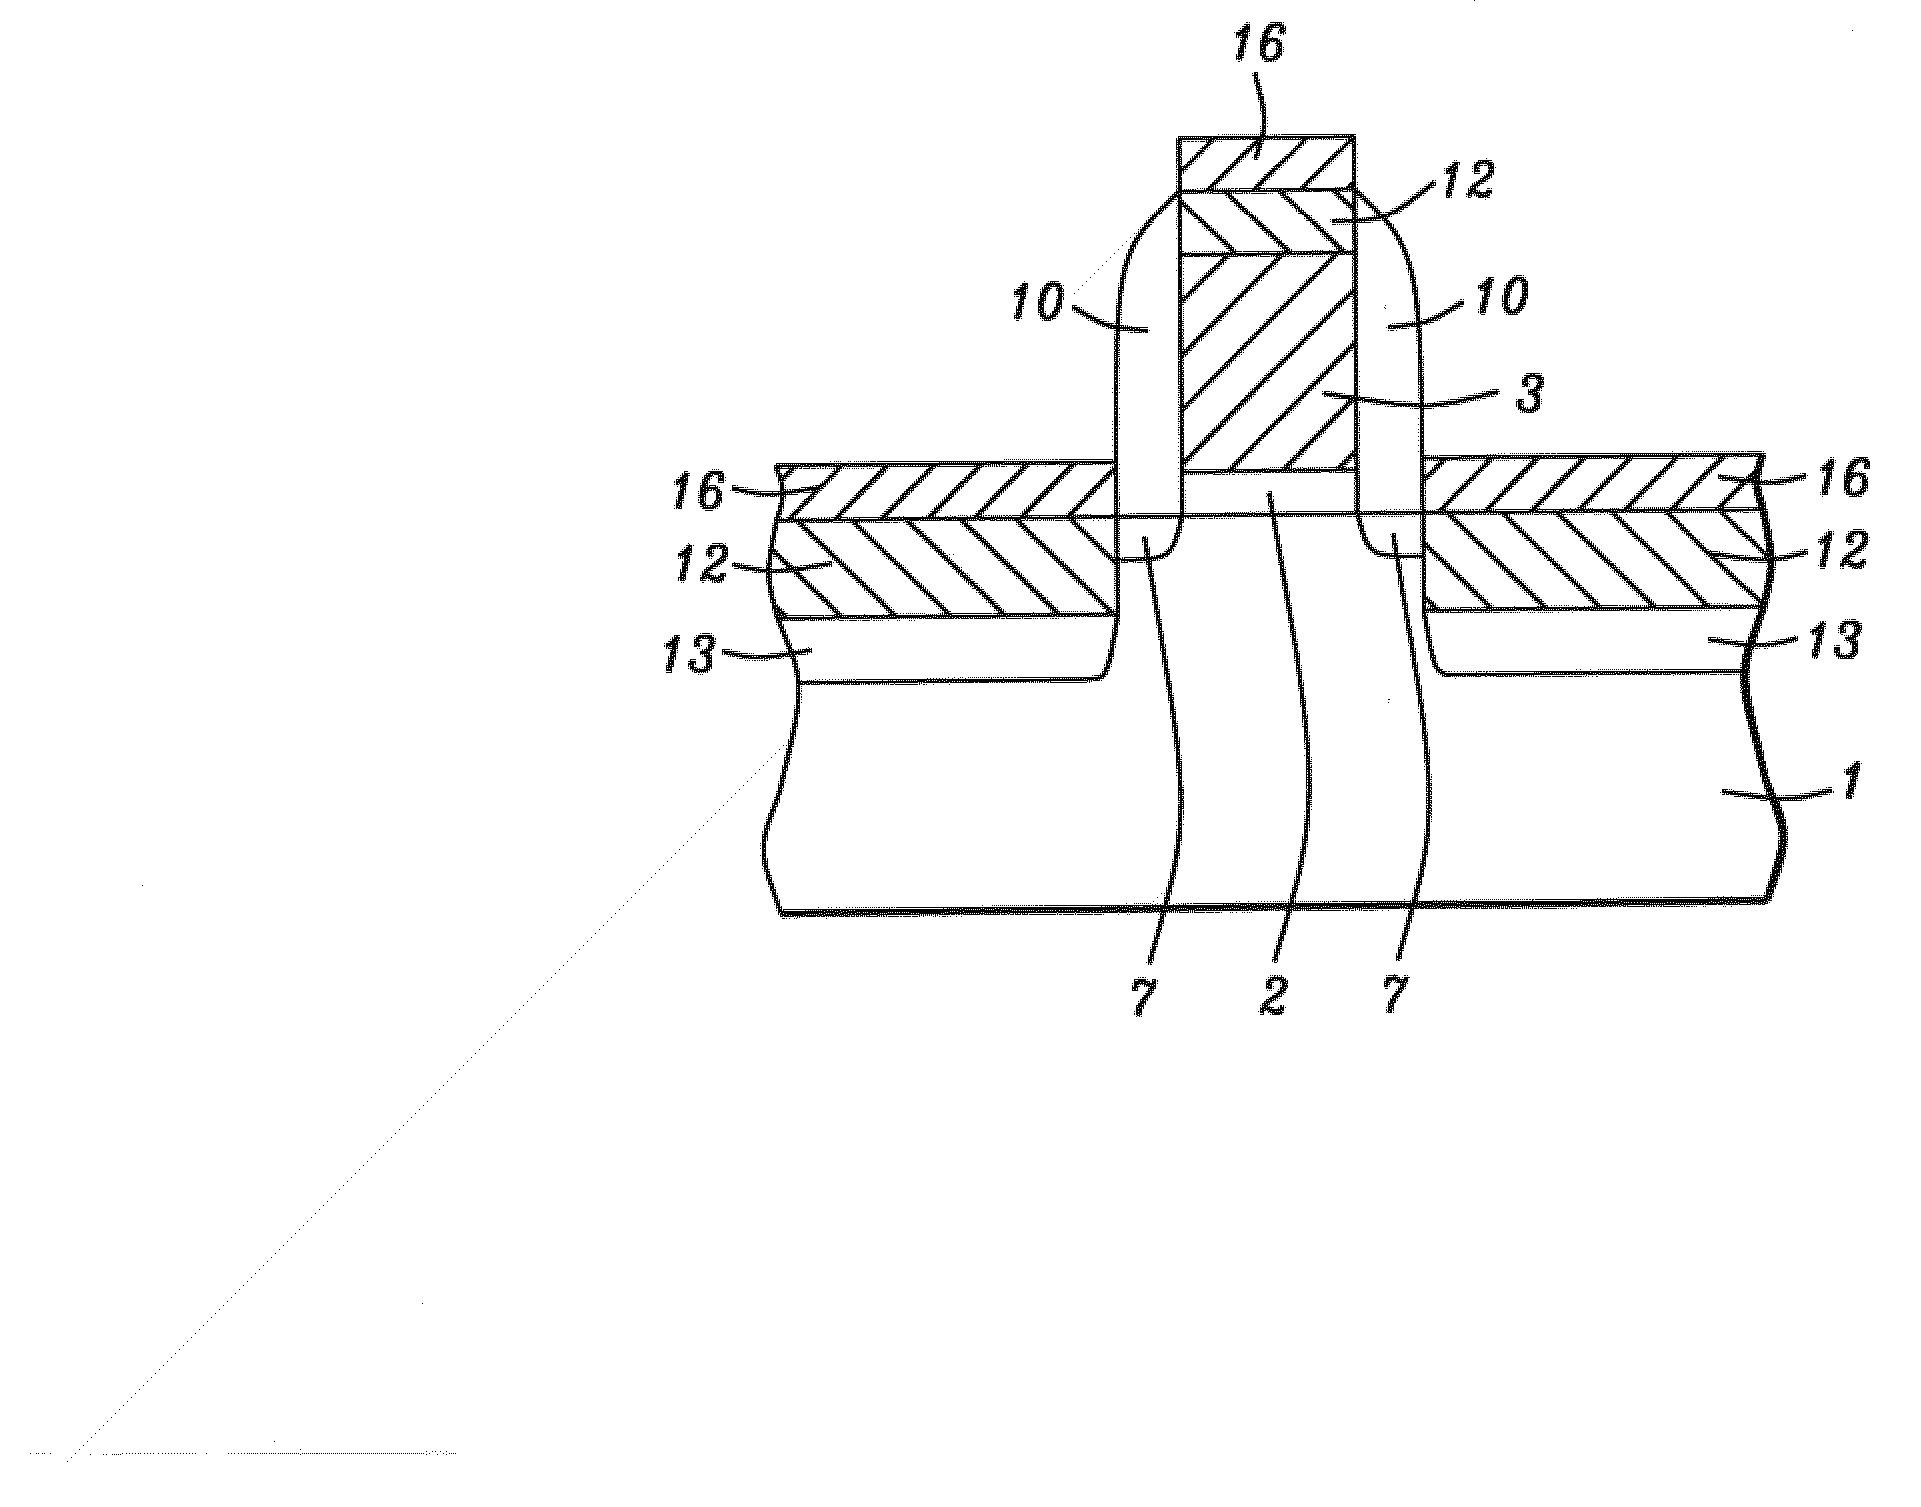 A Recessed Polysilicon Gate Structure for a Strained Silicon MOSFET Device